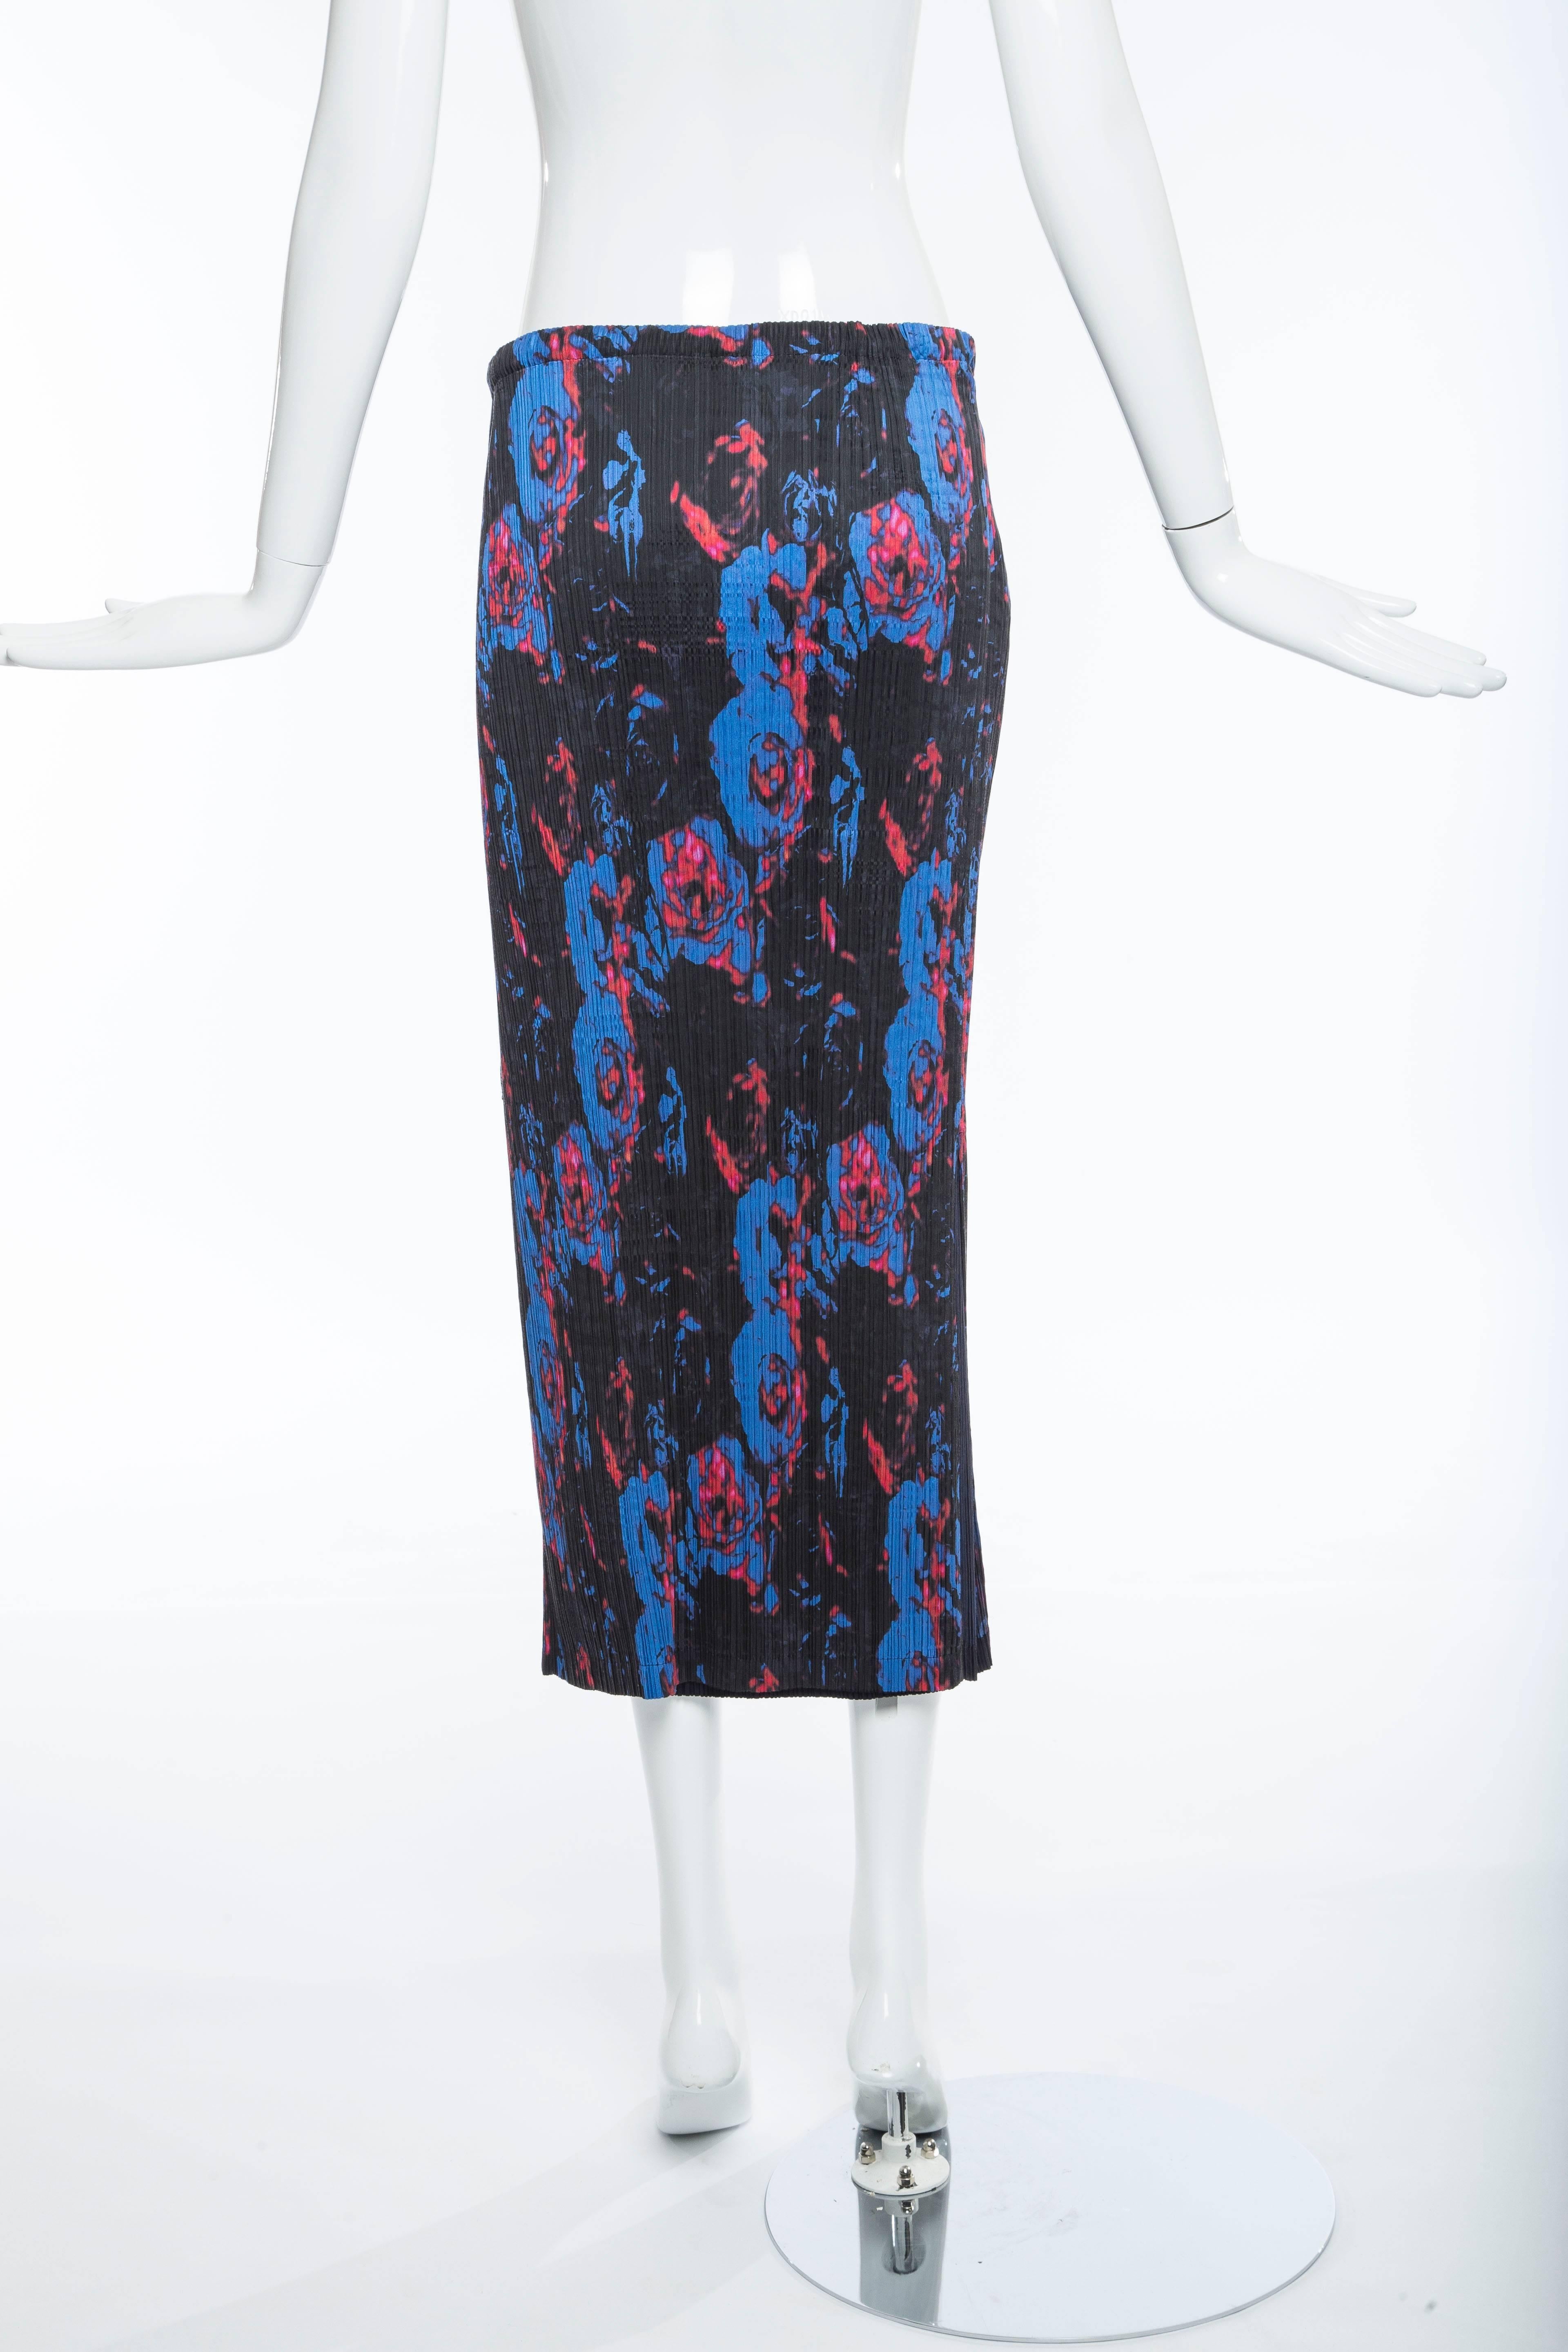 Issey Miyake Navy Blue Printed Silk Pleated Skirt,  Spring 2007 In Excellent Condition For Sale In Cincinnati, OH